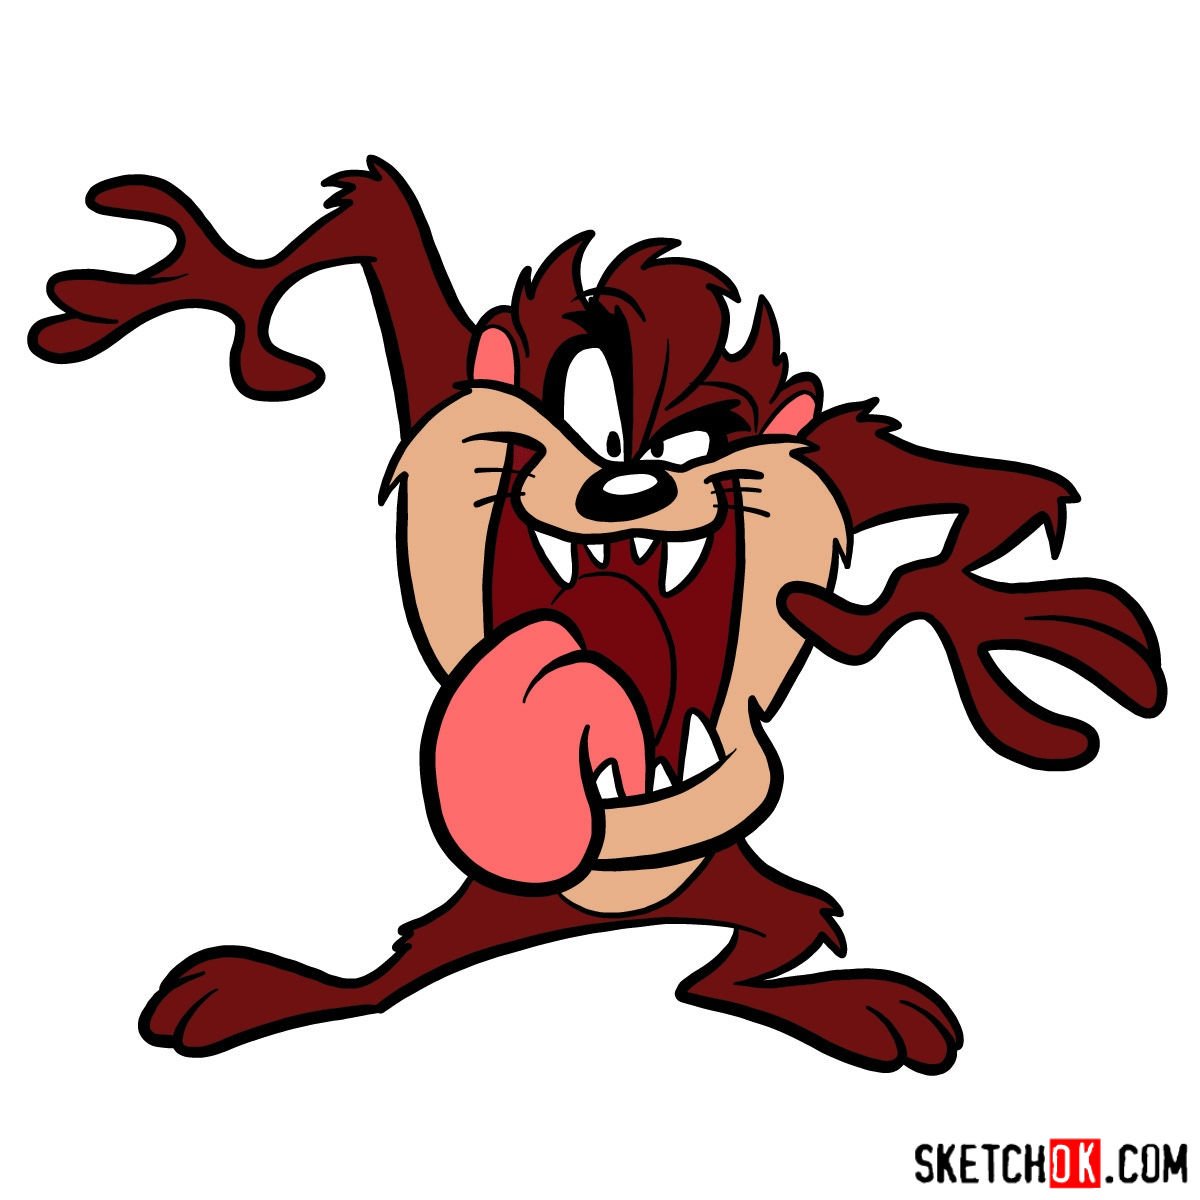 How to draw Taz the Tasmanian Devil - Sketchok easy drawing guides